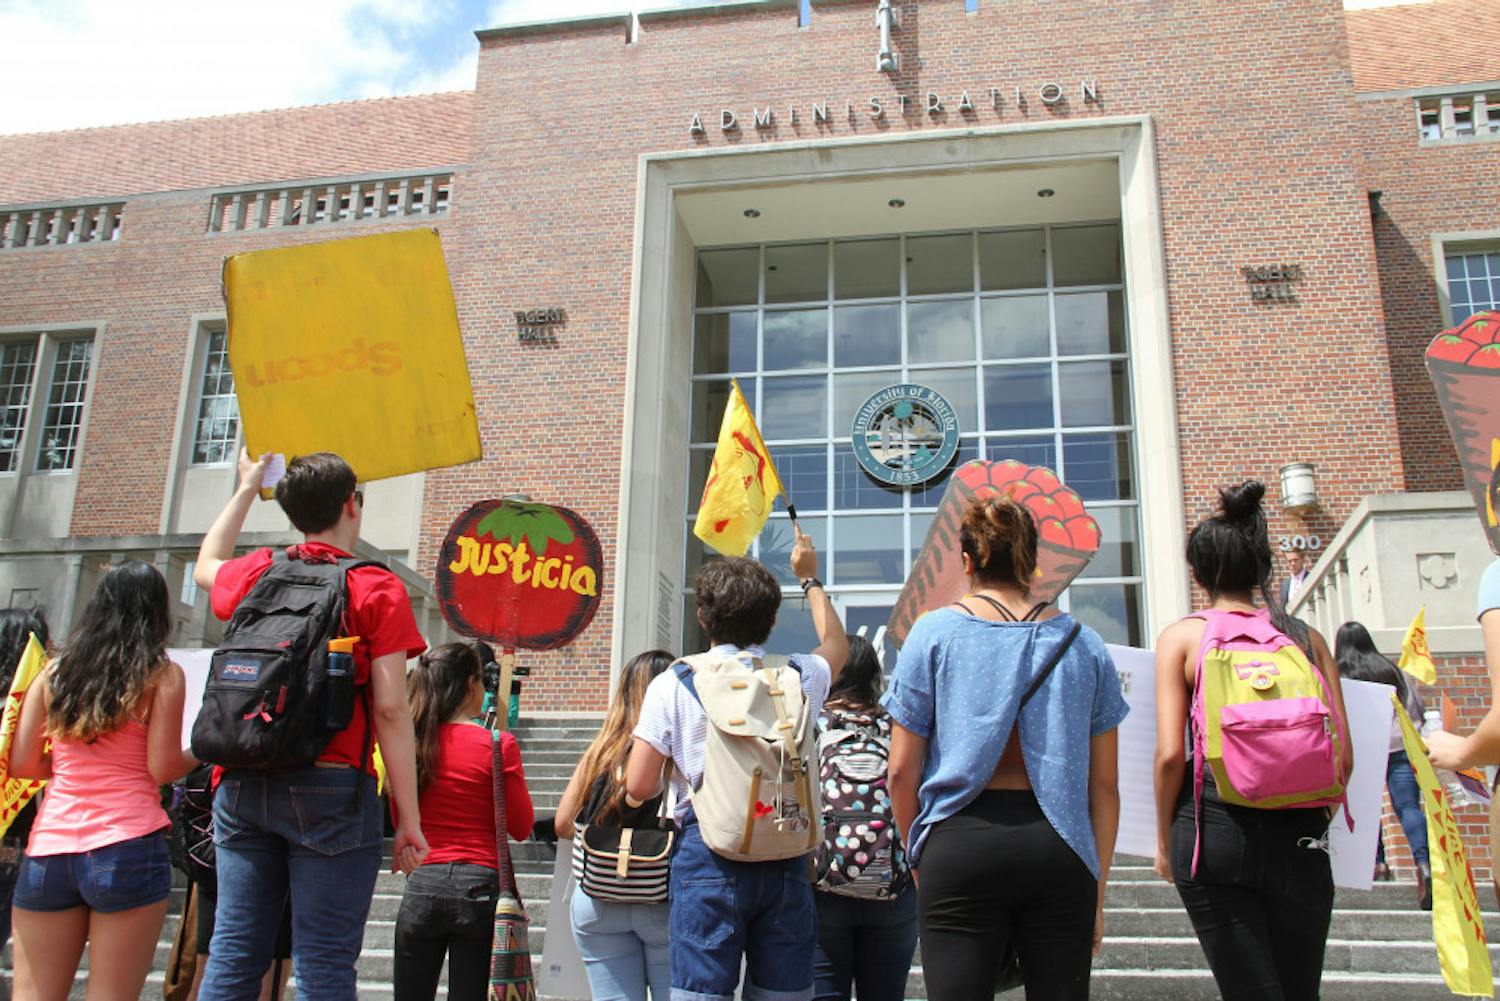 Protesters walked from the Reitz Union, where the on-campus Wendy’s location is, to Tigert Hall  on Thursday afternoon to demand that the school’s administration tells the fast food chain to sign onto the Fair Food Program, which works to protect farmers’ rights. Before they marched, speakers told the group of about 20 students Wendy’s was not serving the interests of migrant farmers.
Organizer Daphne Fernandez said all workers deserve a living wage.
“Having Wendy’s on this campus is an ethical dilemma,” she said. “We are going to pressure Fuchs to remove Wendy’s from our campus.”
 